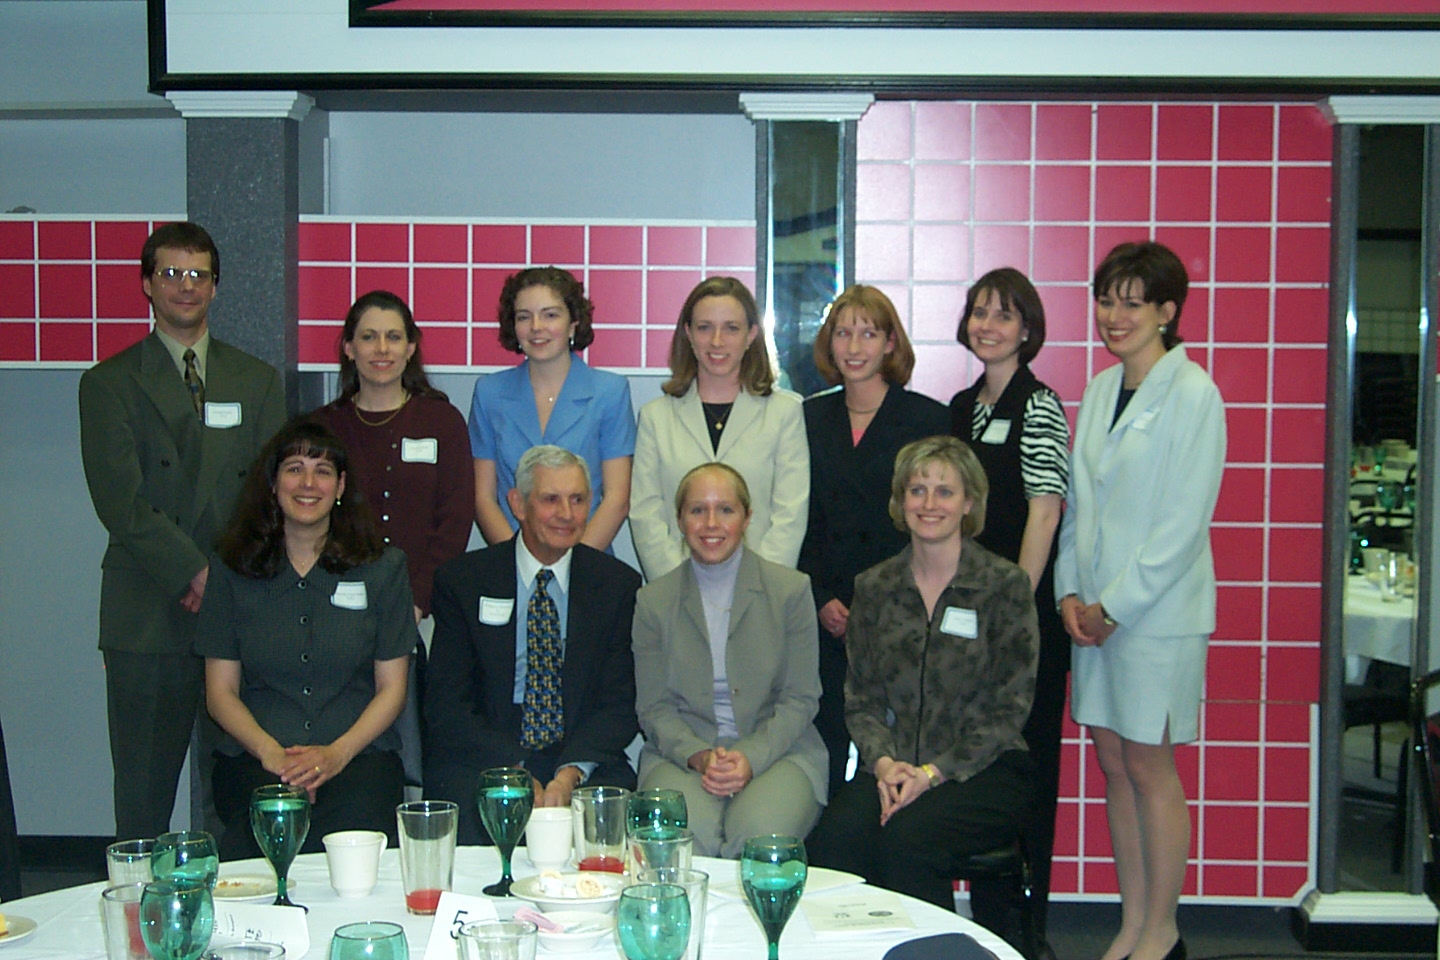 Several Past Presidents with William Primrose, one of our donors.